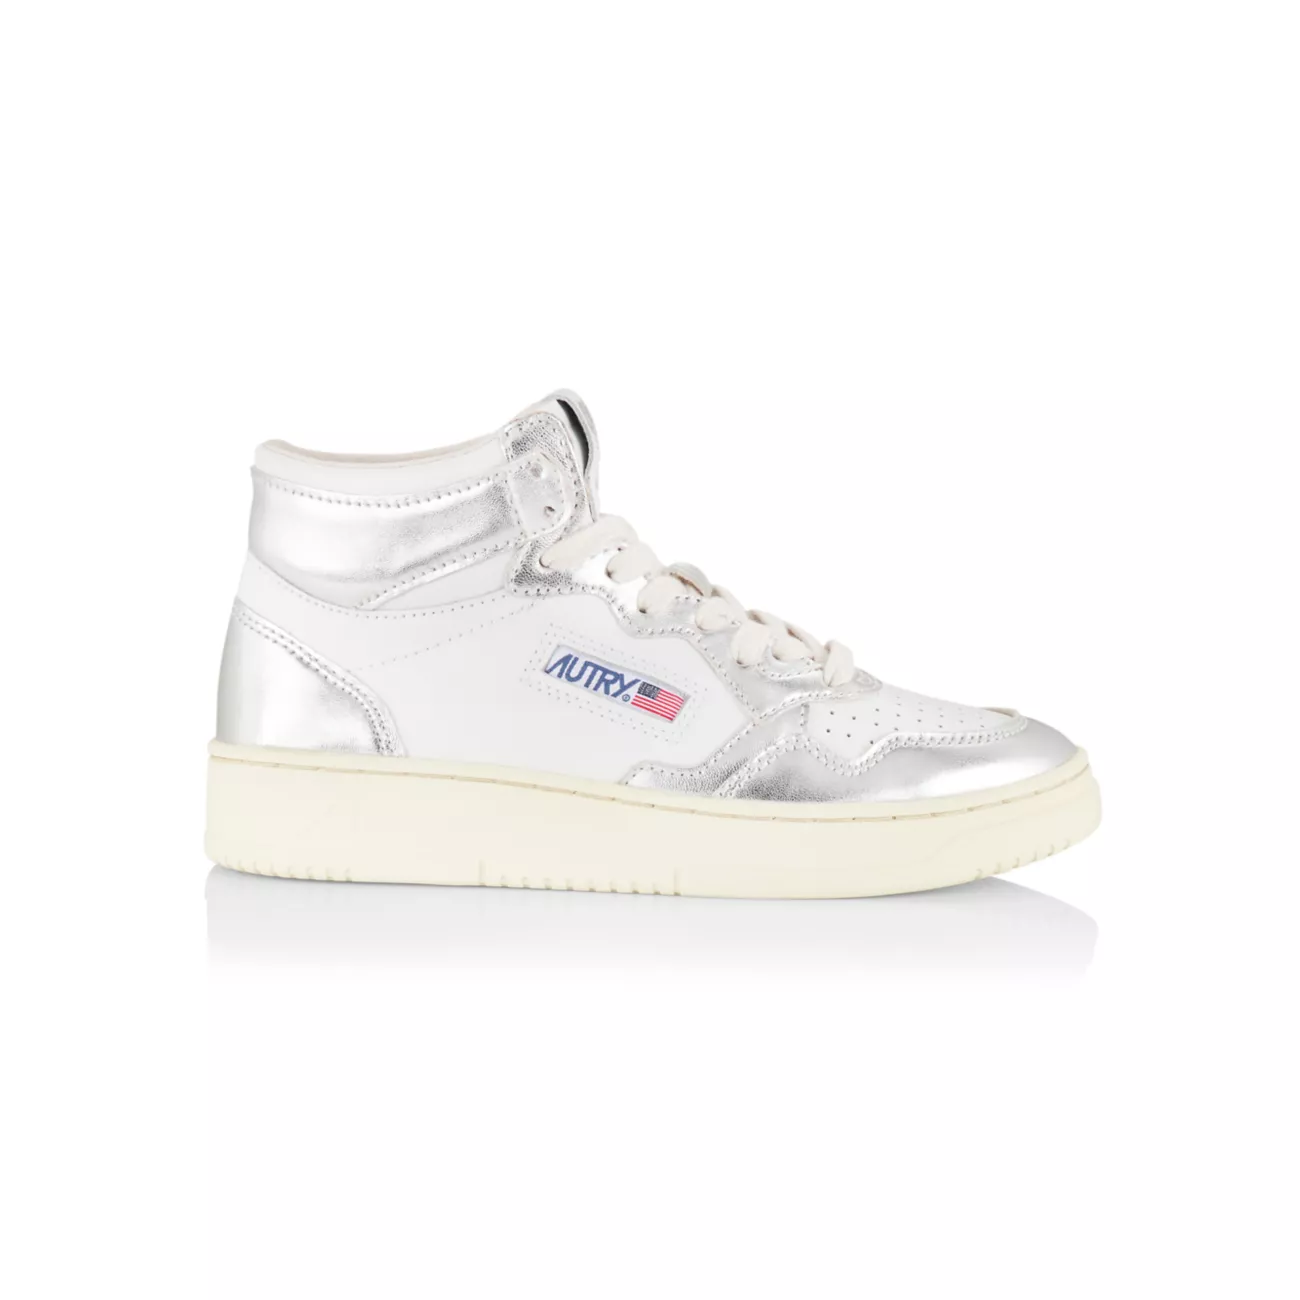 Medalist Leather Mid-Top Sneakers Autry